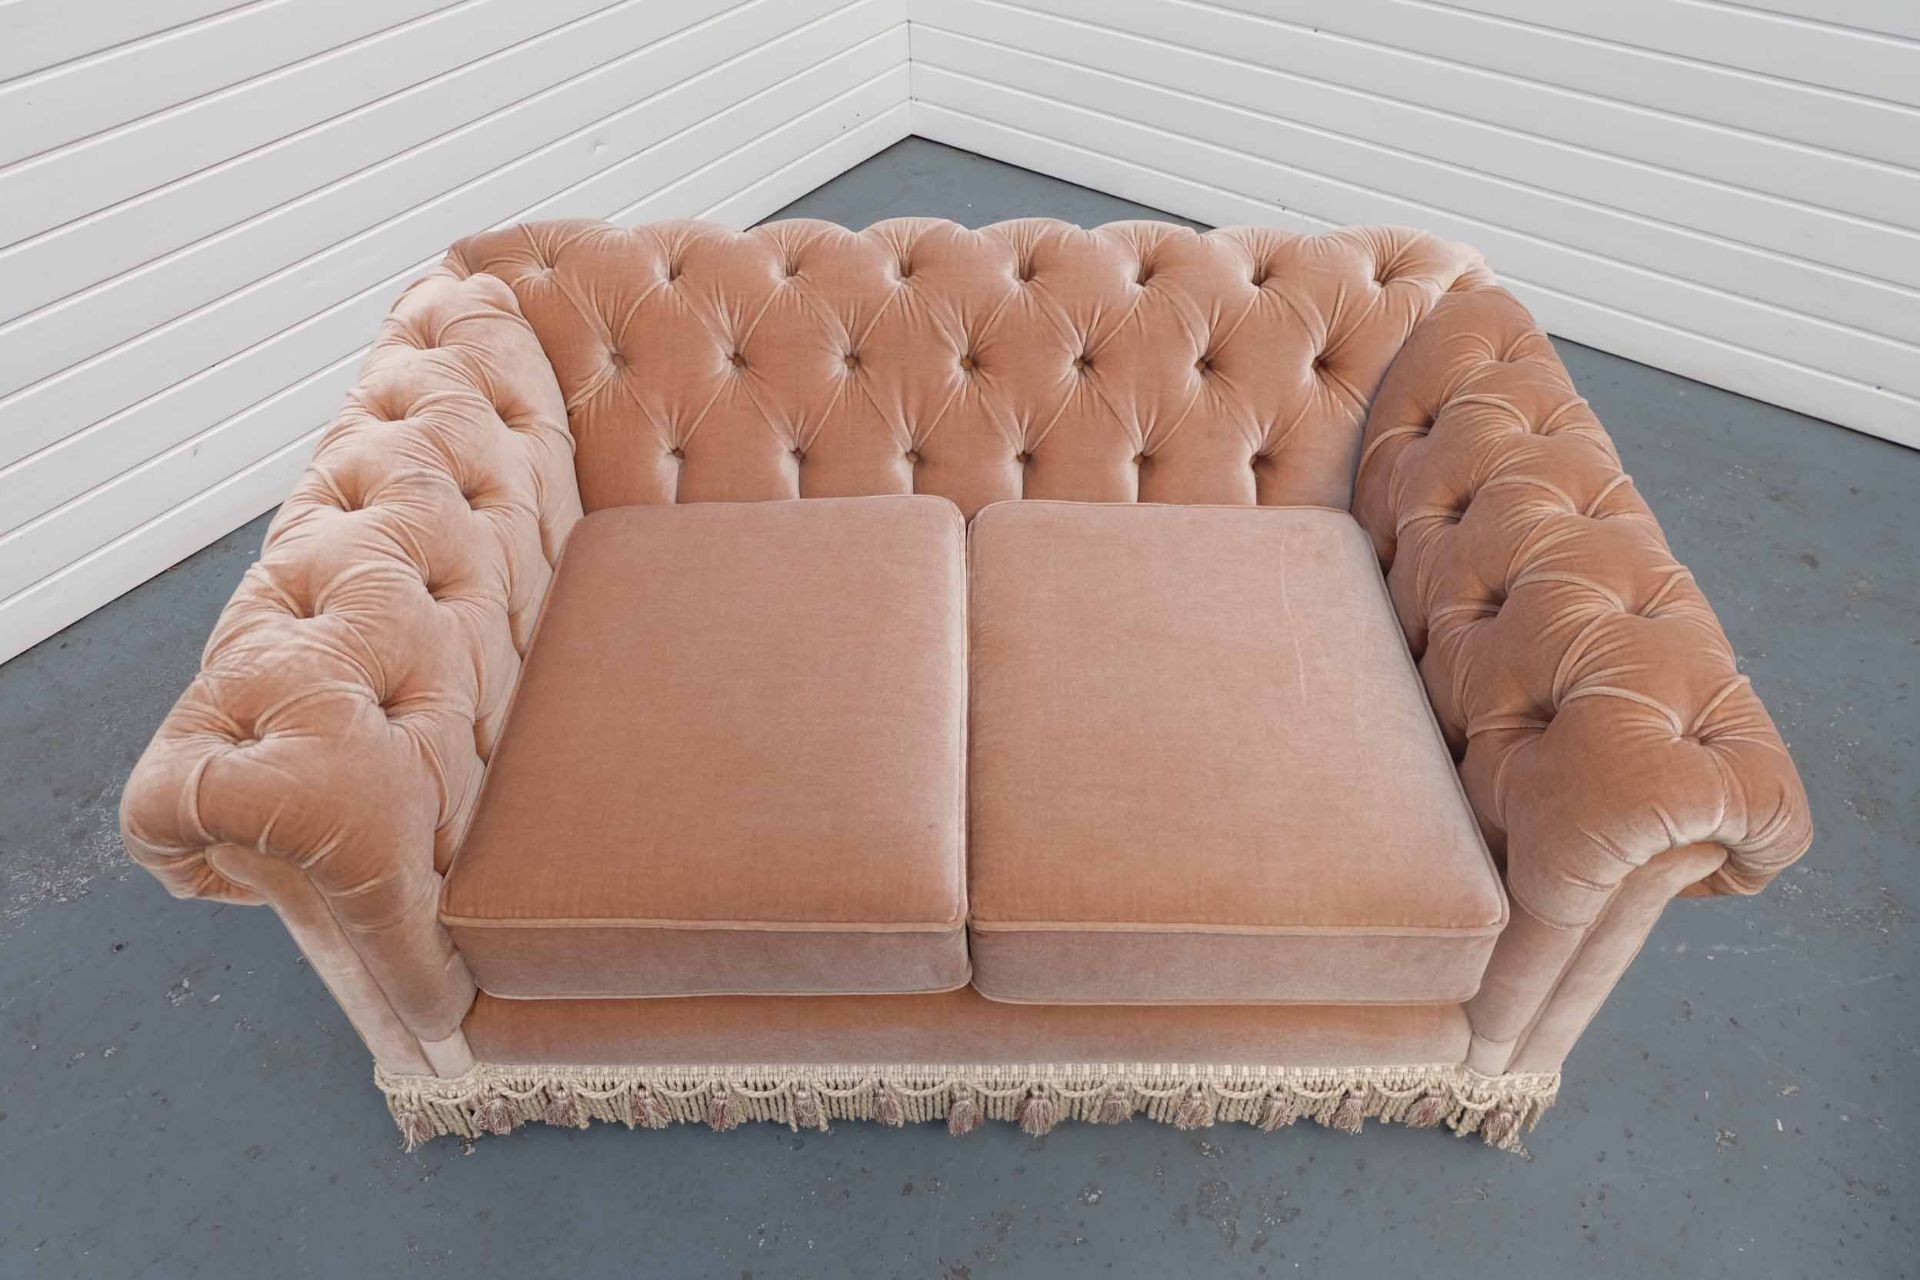 Chesterfield 2 Seater Sofa. With Tassel Trim. - Image 2 of 4